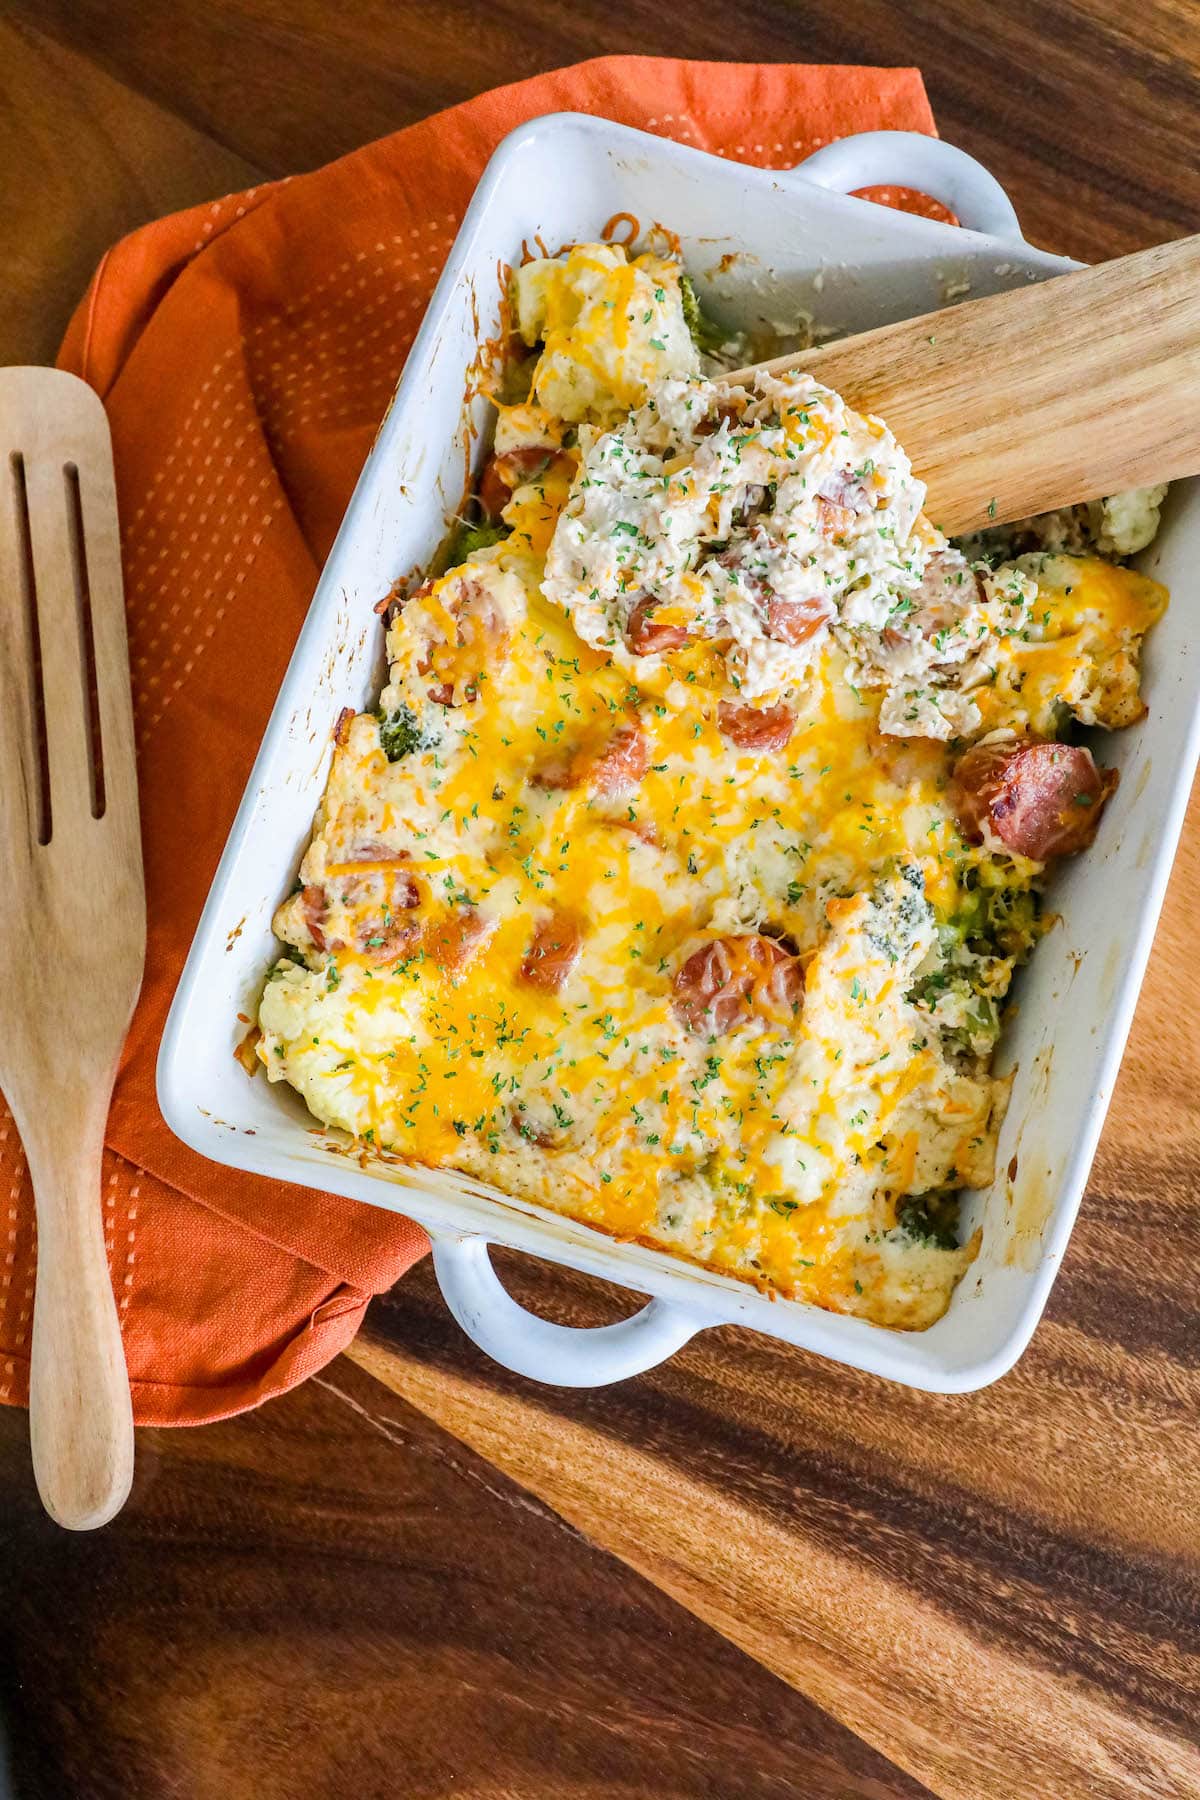 a spoon scooping up cheesy casserole with sliced sausage, broccoli, cauliflower, and herb seasonings in a white casserole dish on a table